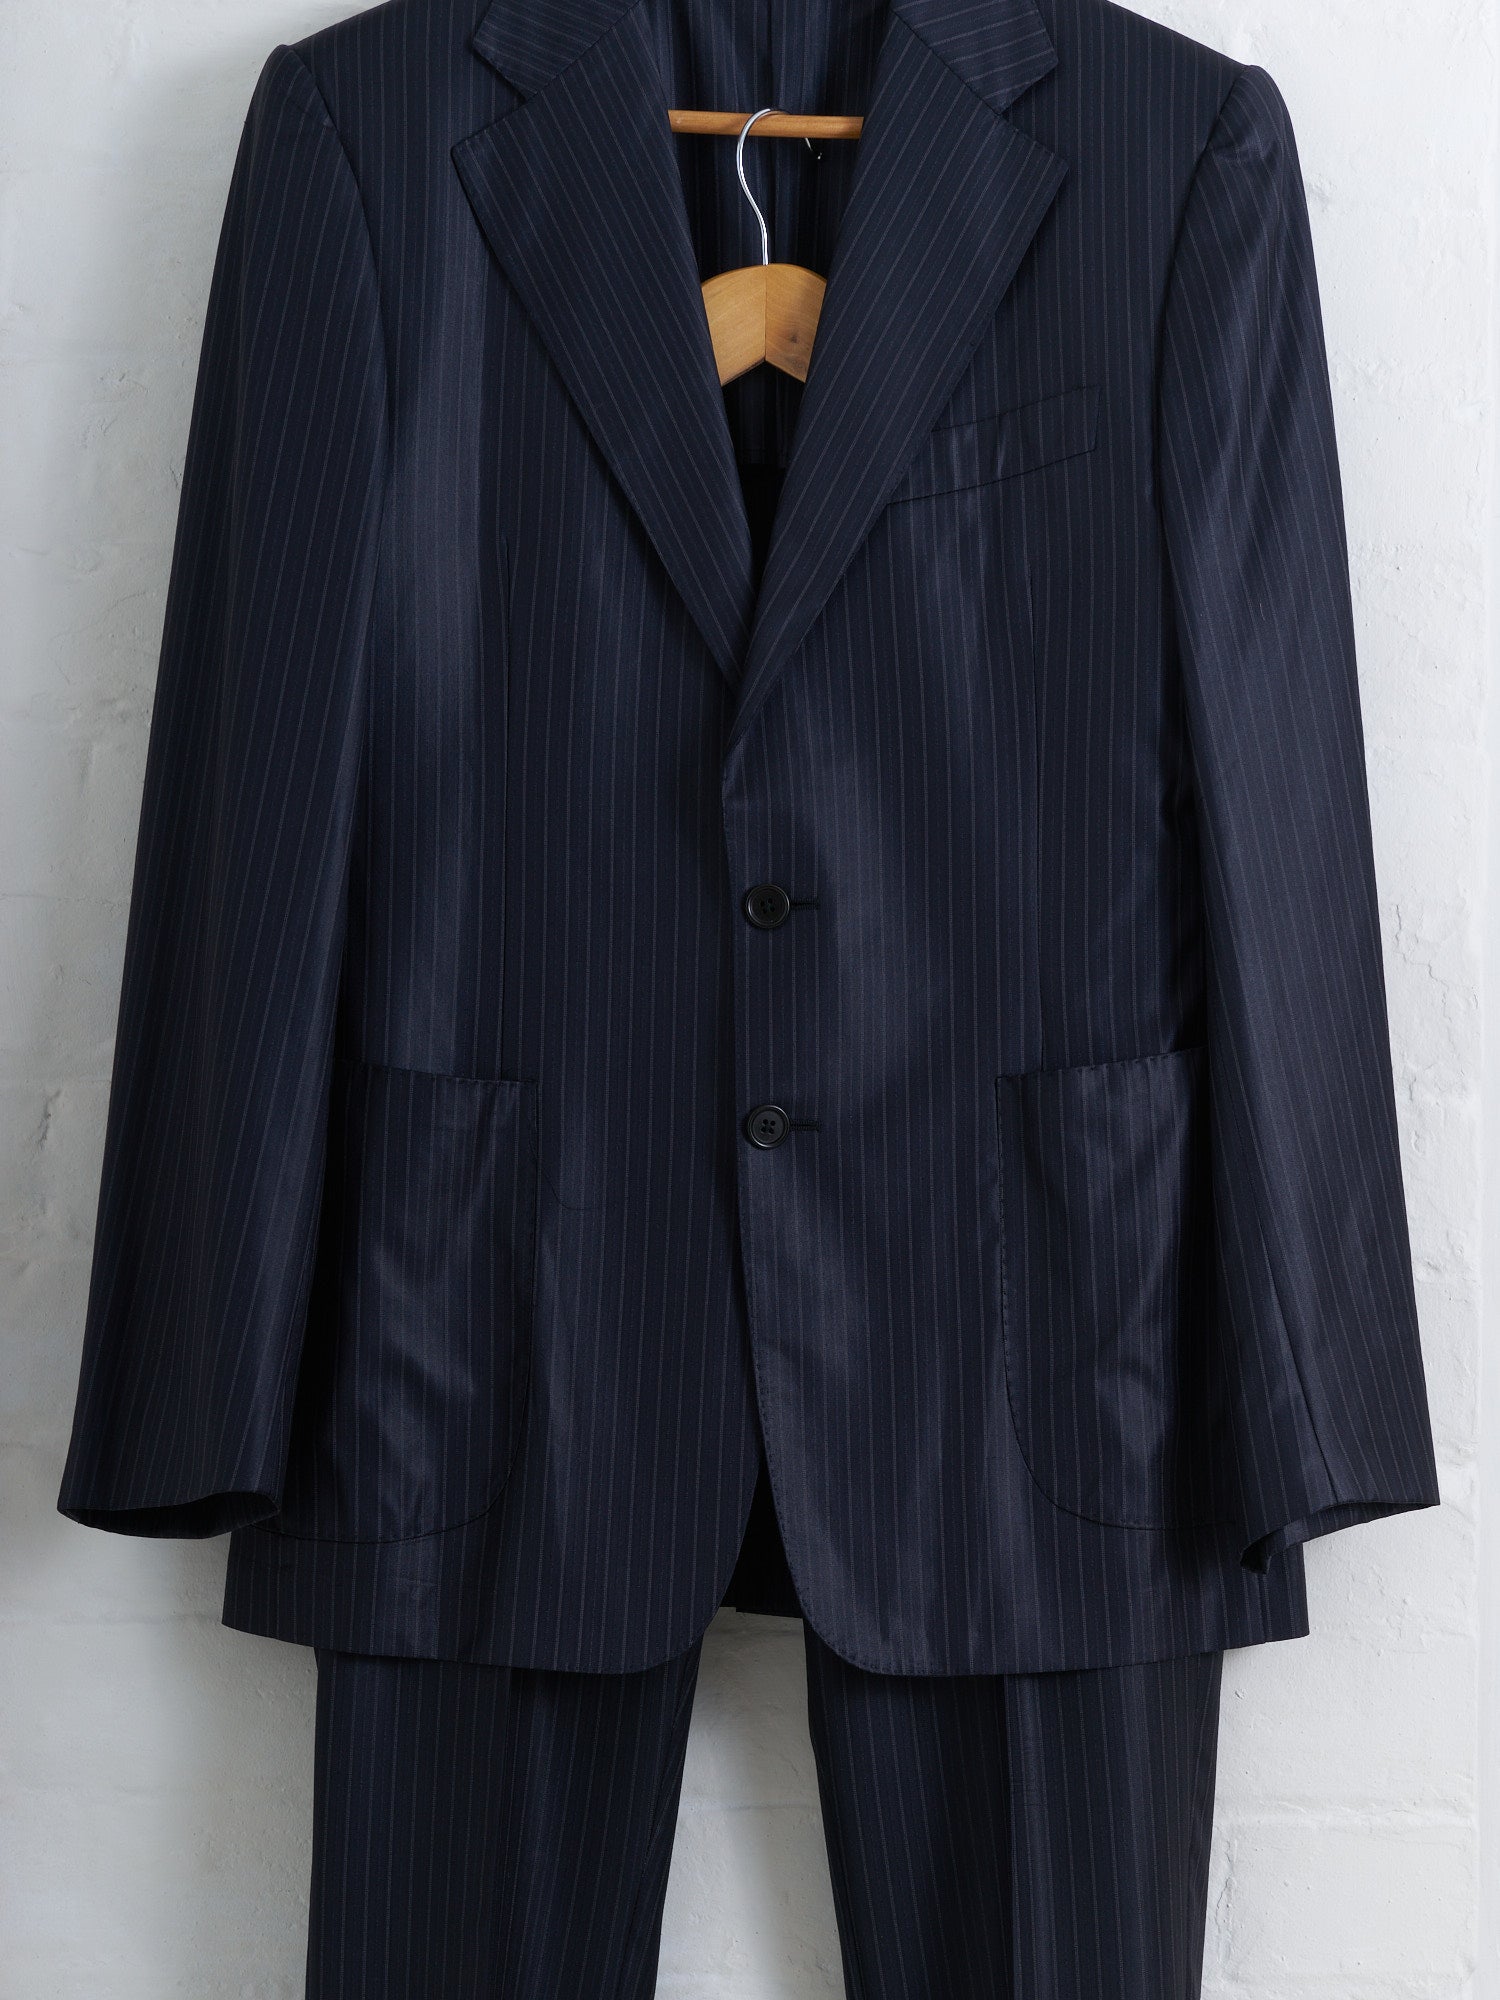 Romeo Gigli glossy striped wool two button trouser suit - mens 46 48